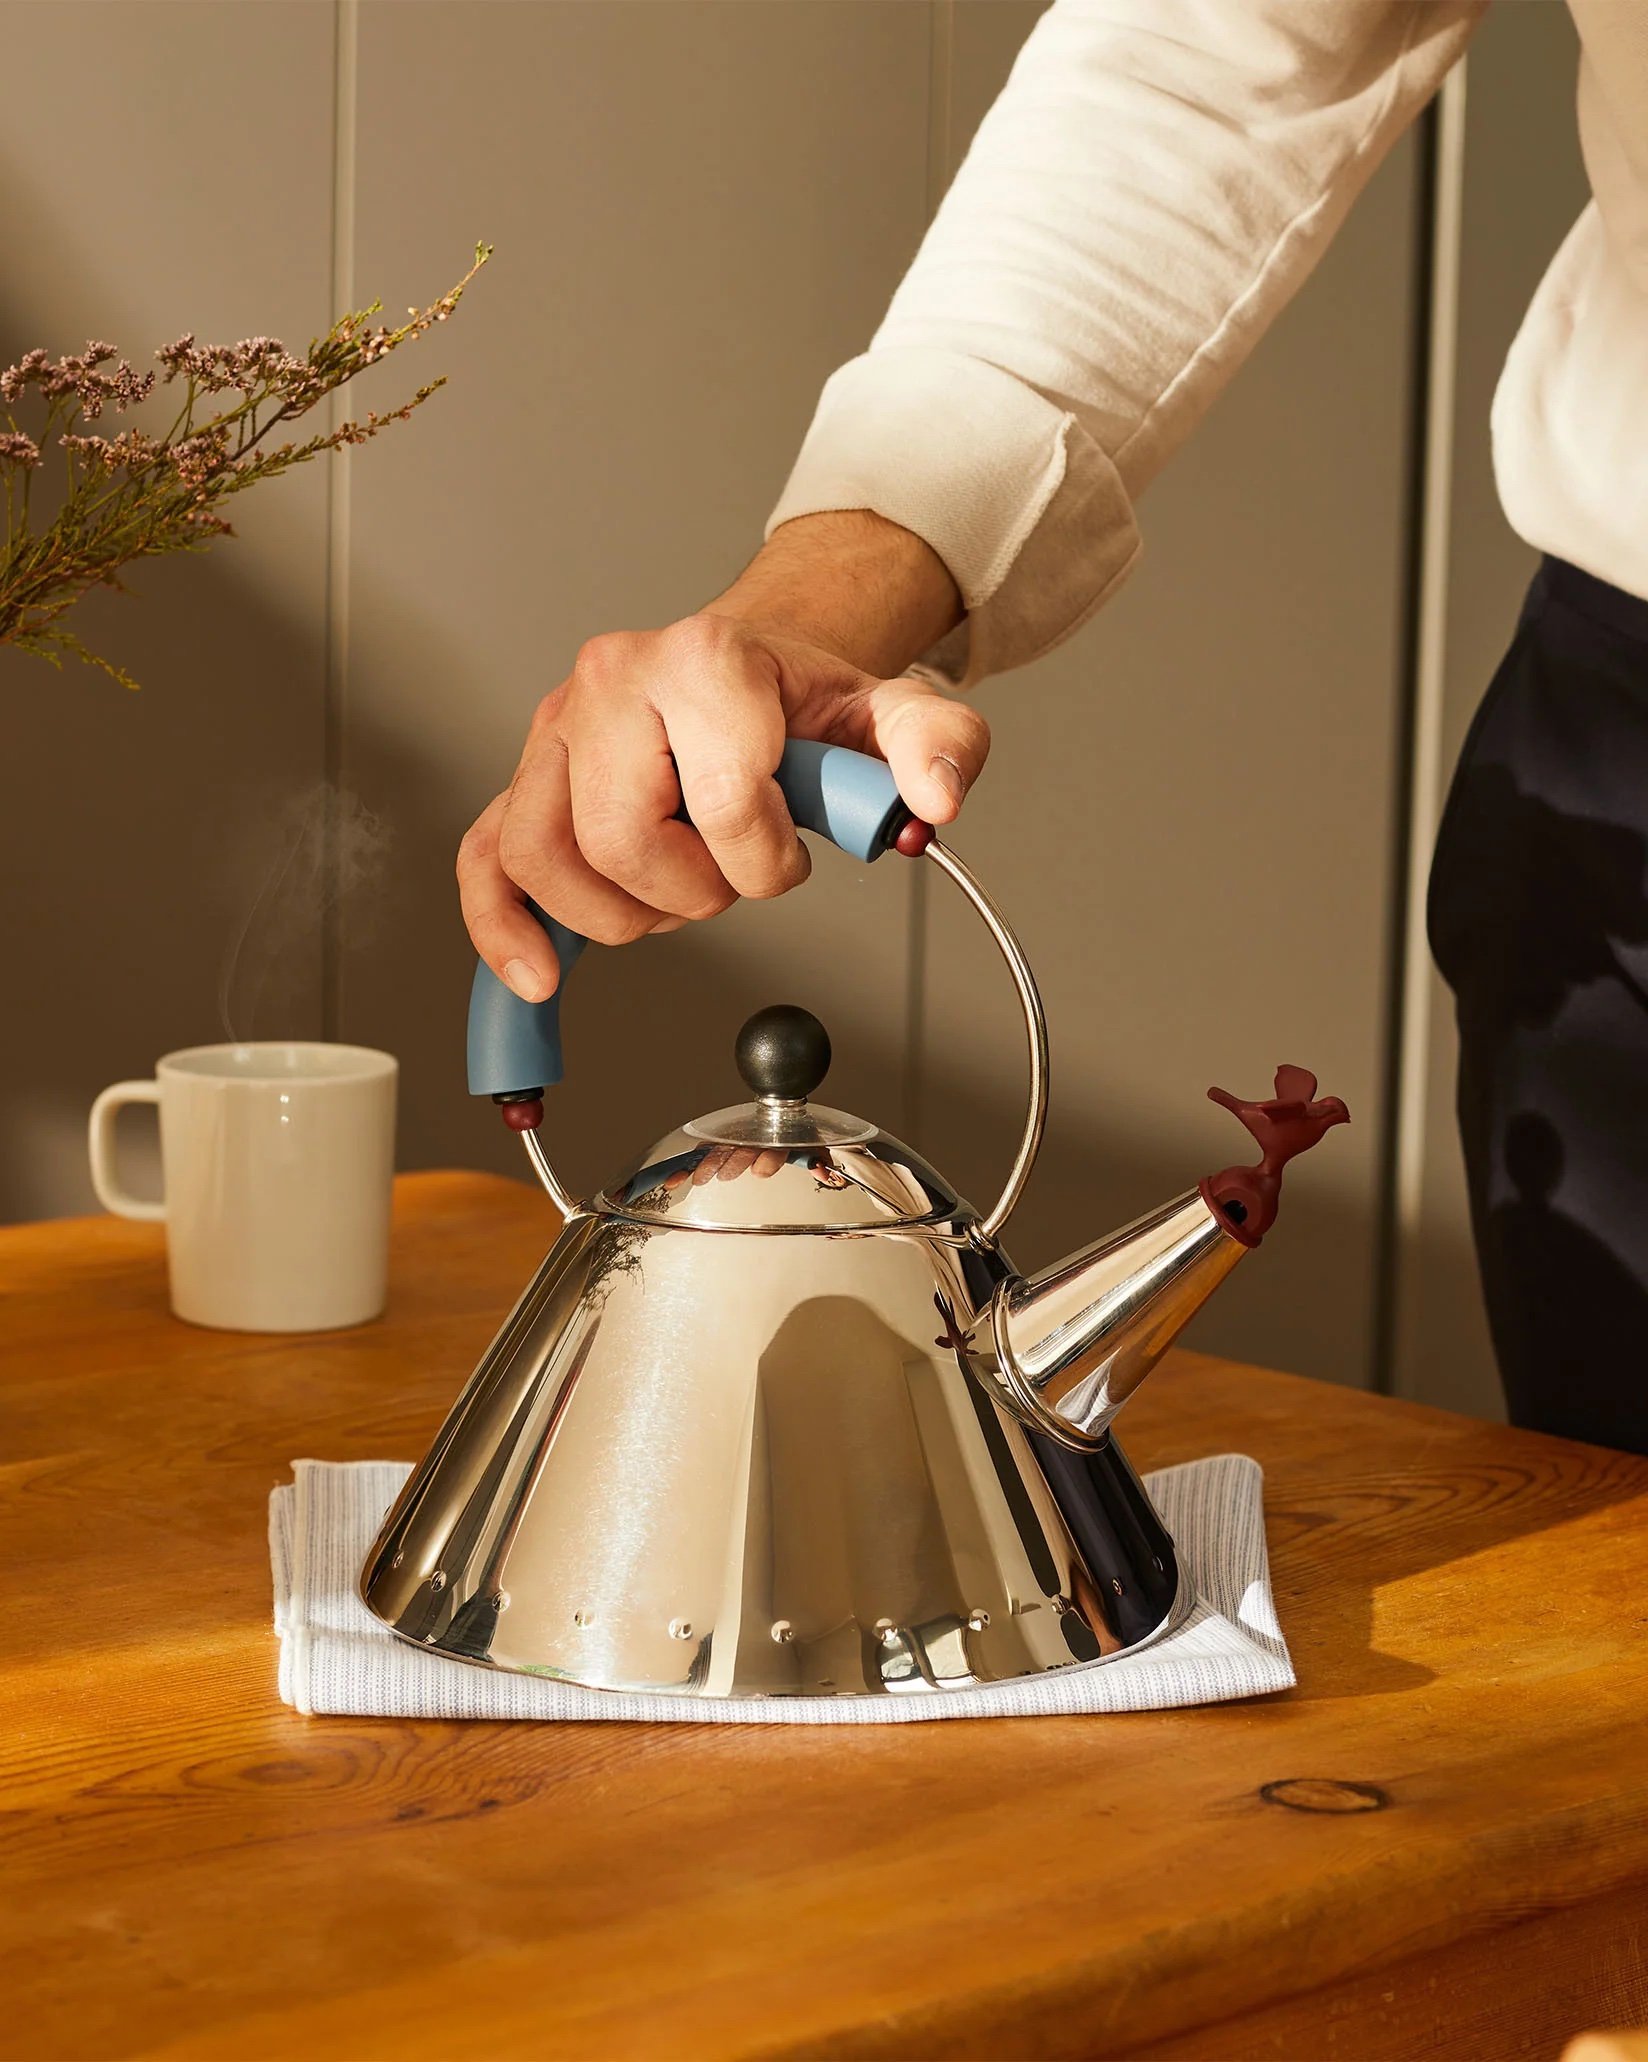 11 Non-Toxic Tea Kettle Brands For A Safe, Healthy Cuppa — Sustainably Chic